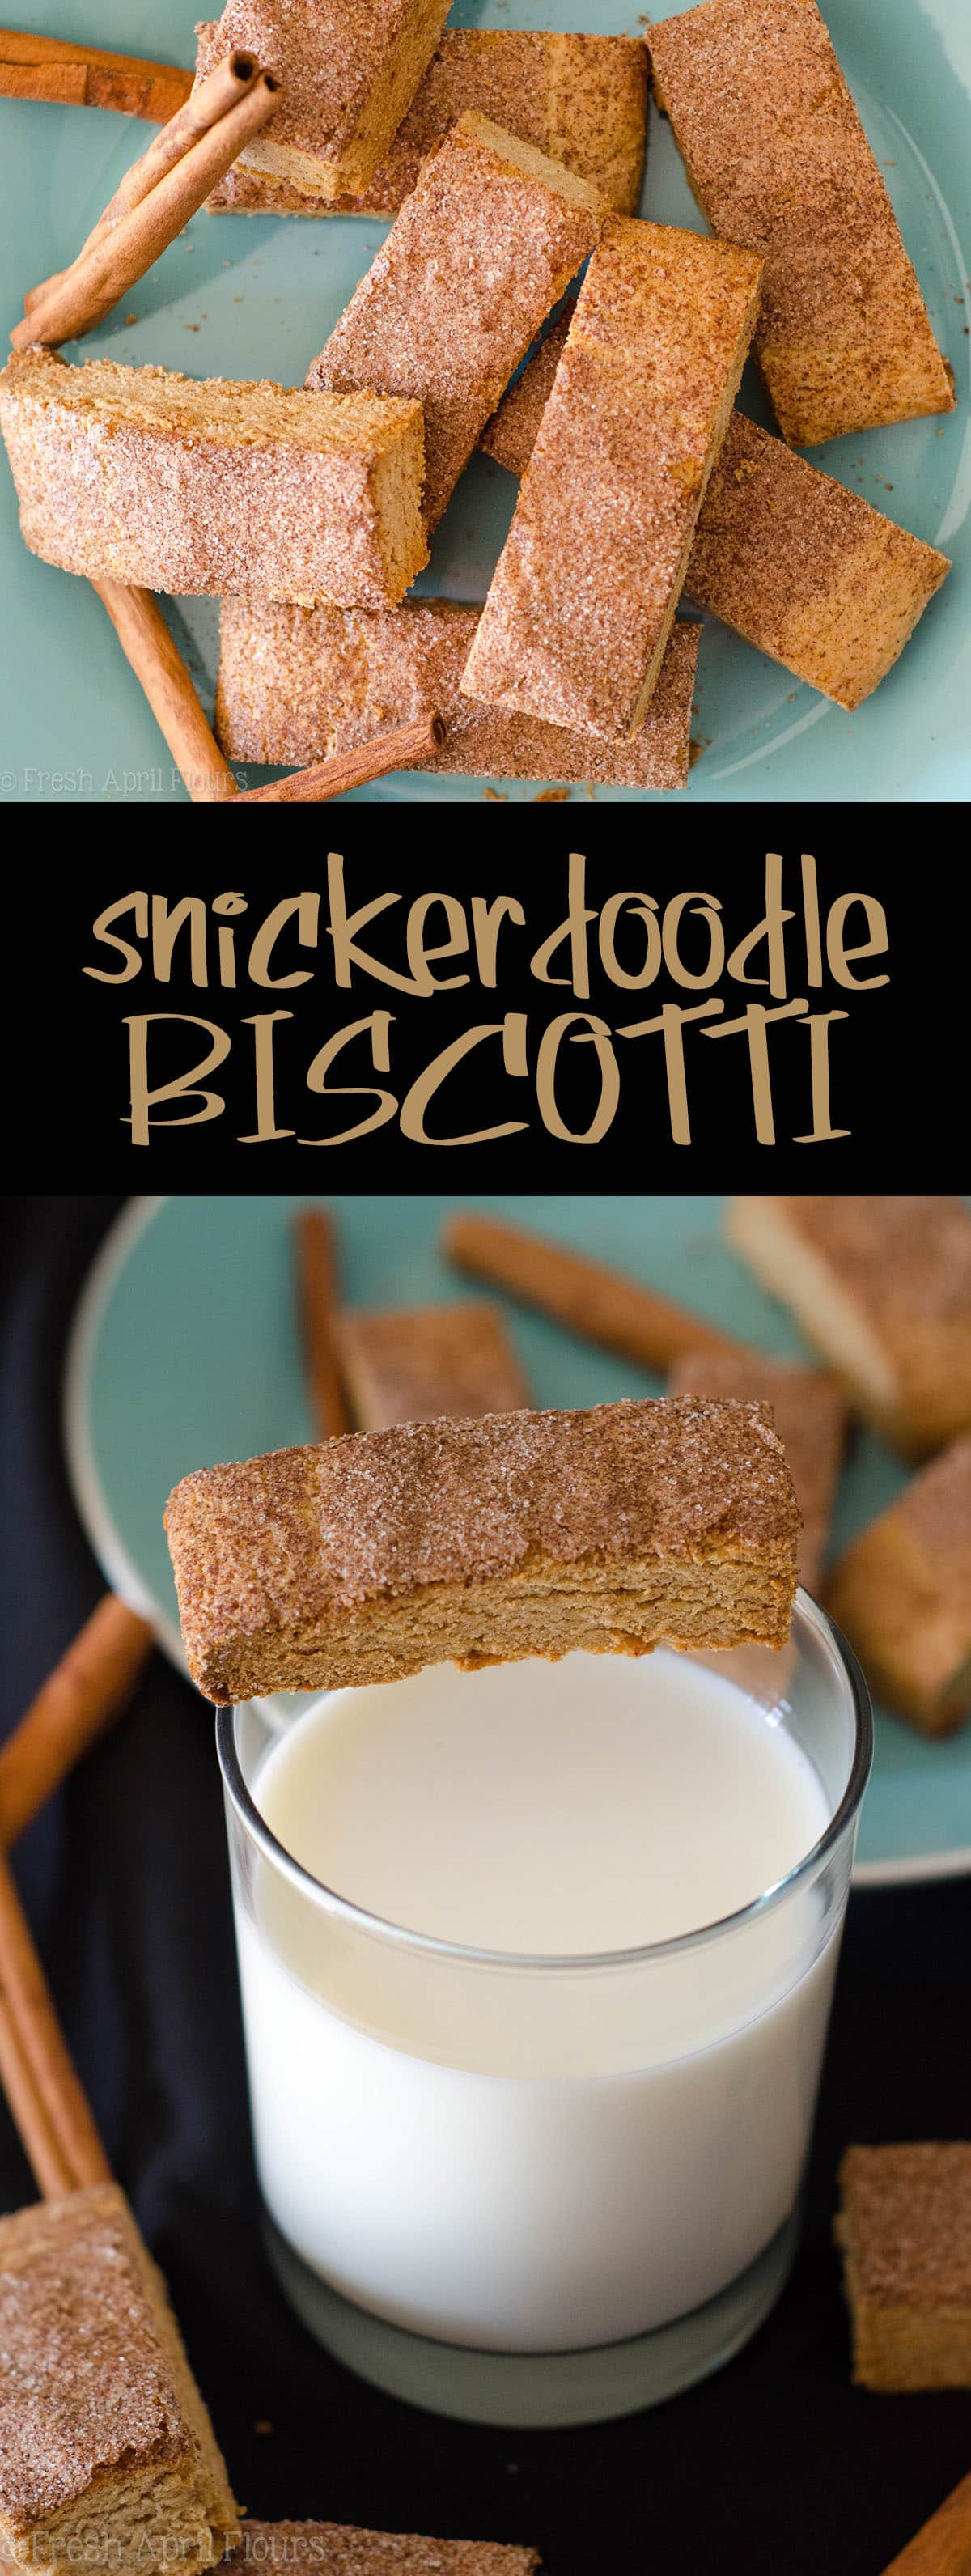 Snickerdoodle Biscotti: Cinnamon-spiced biscotti covered in a crunchy cinnamon sugar coating. It's just asking to be dunked in coffee! via @frshaprilflours